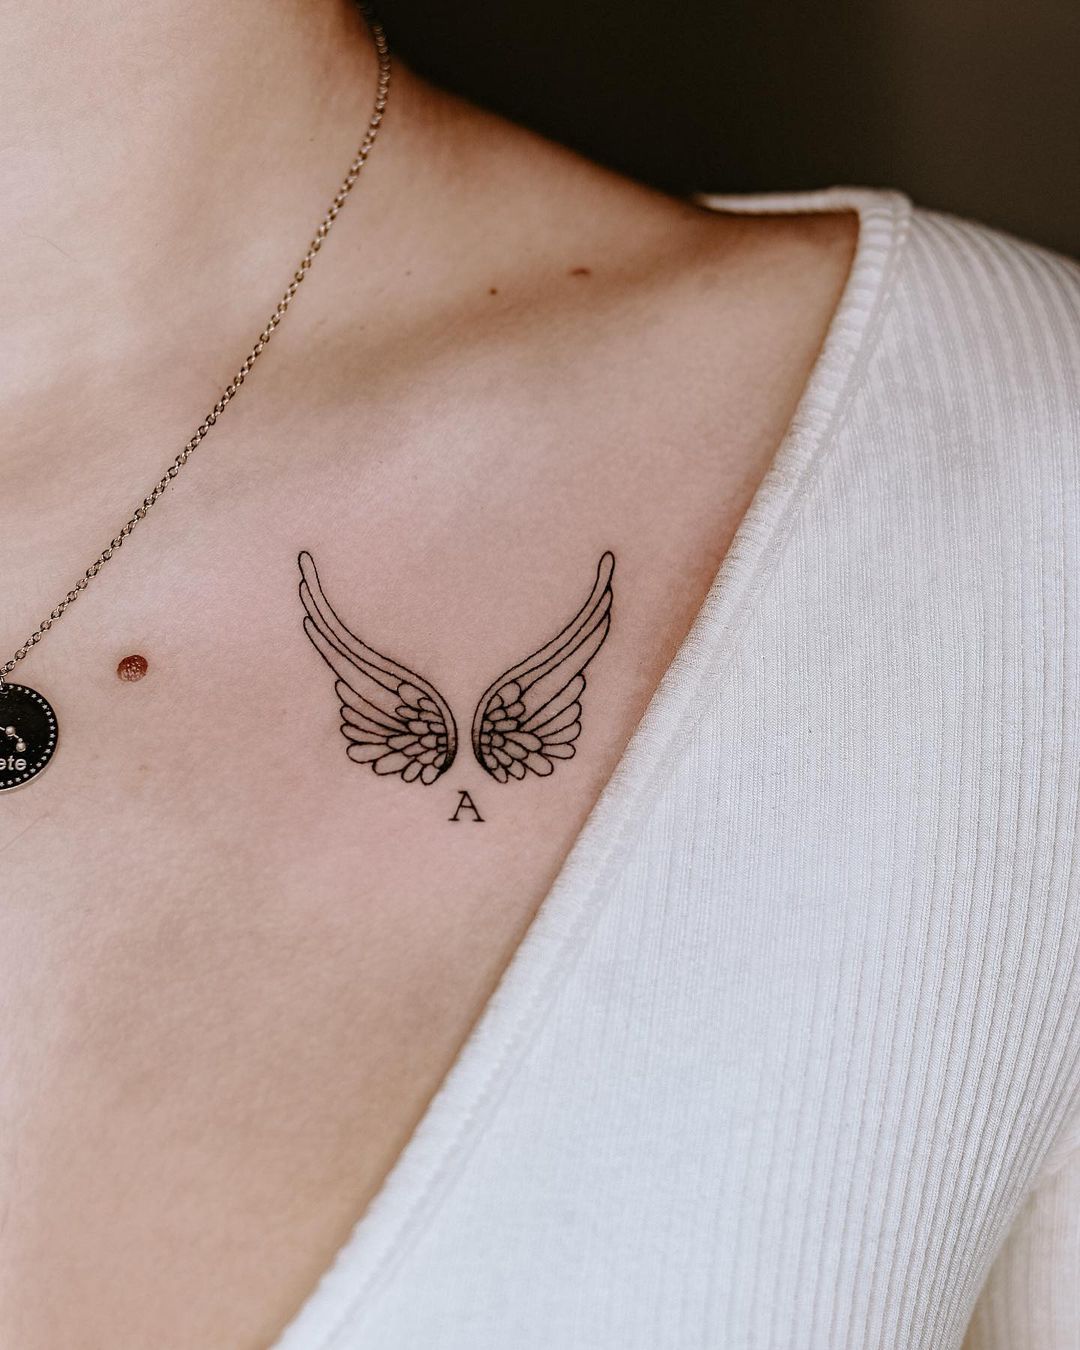 25 Angel Wing Tattoo Design Ideas For Females